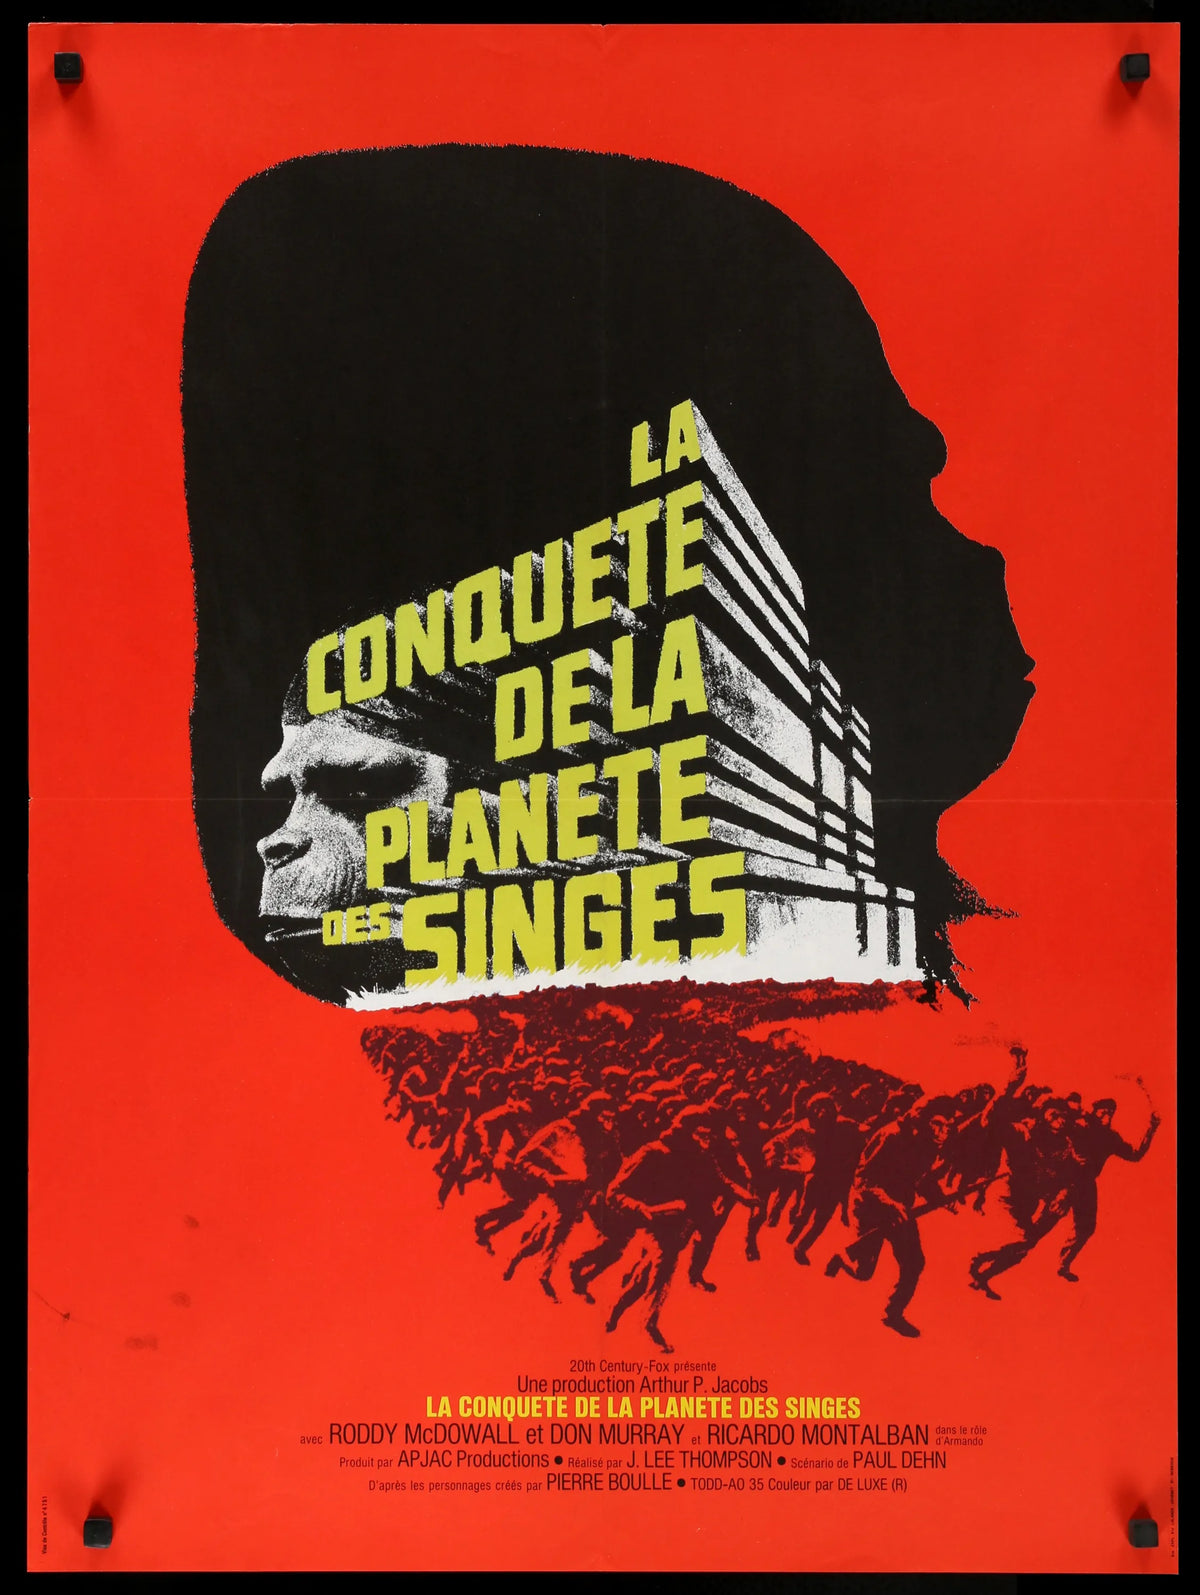 Conquest of the Planet of the Apes (1972) original movie poster for sale at Original Film Art